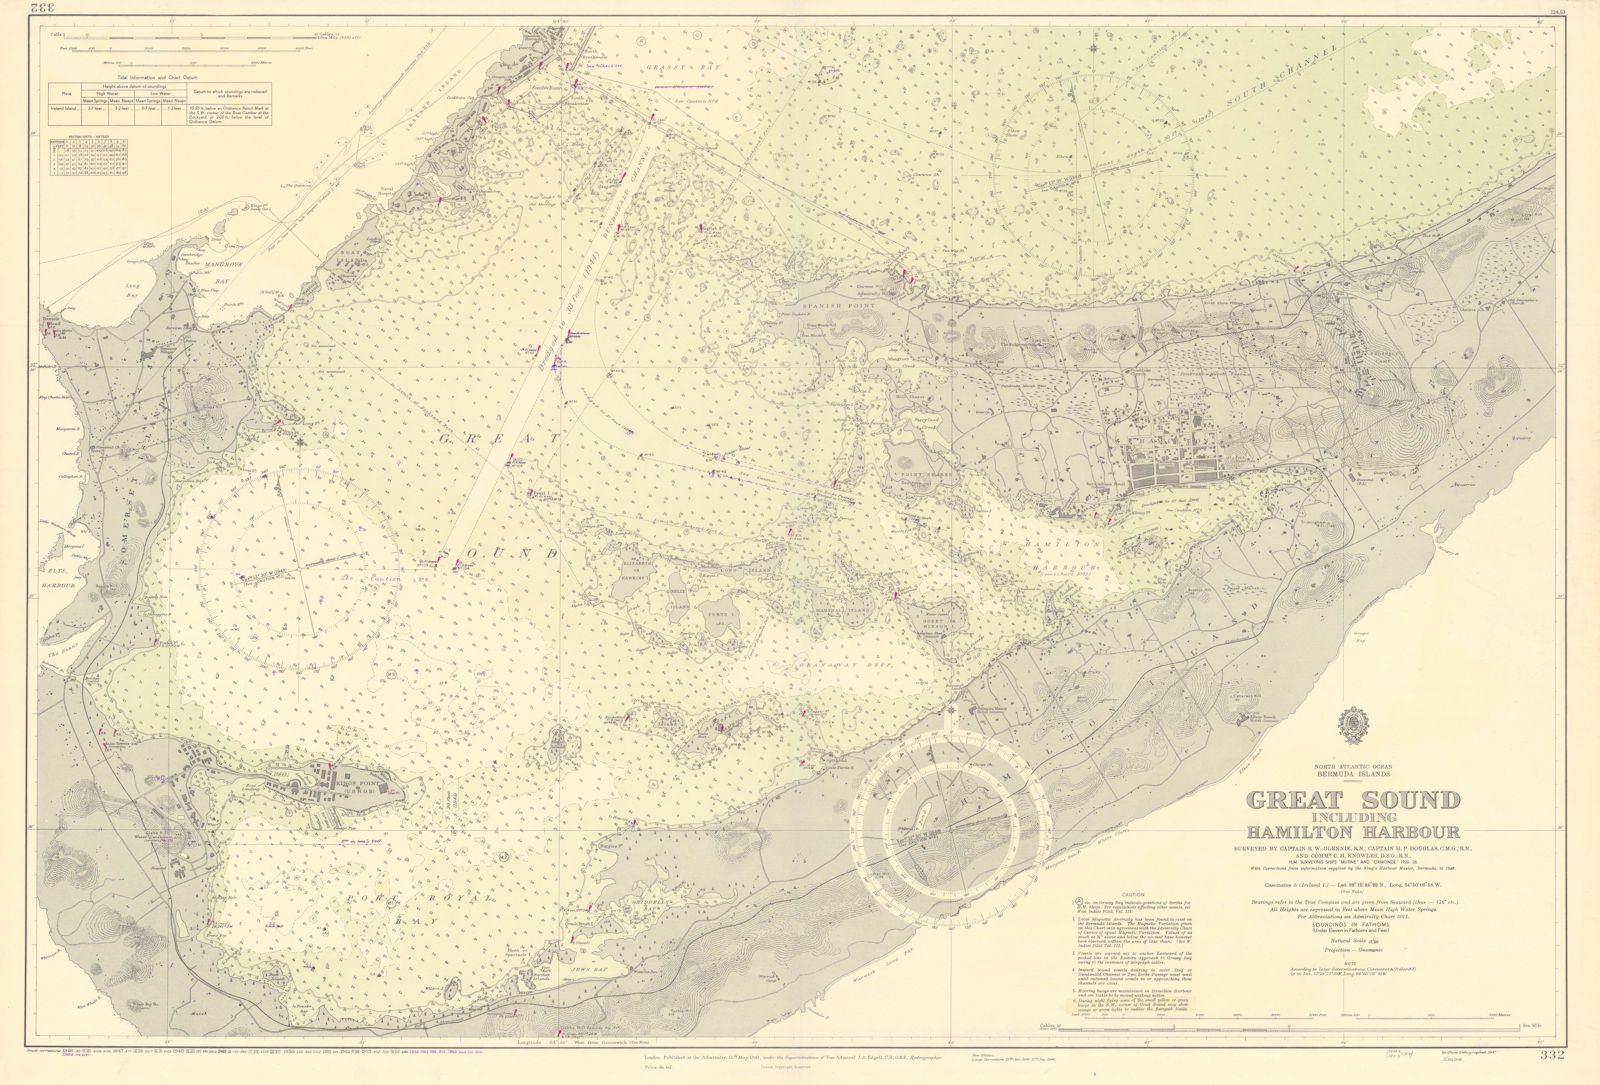 Bermuda Great Sound. Hamilton Harbour ADMIRALTY sea chart 1941 (1956) old map